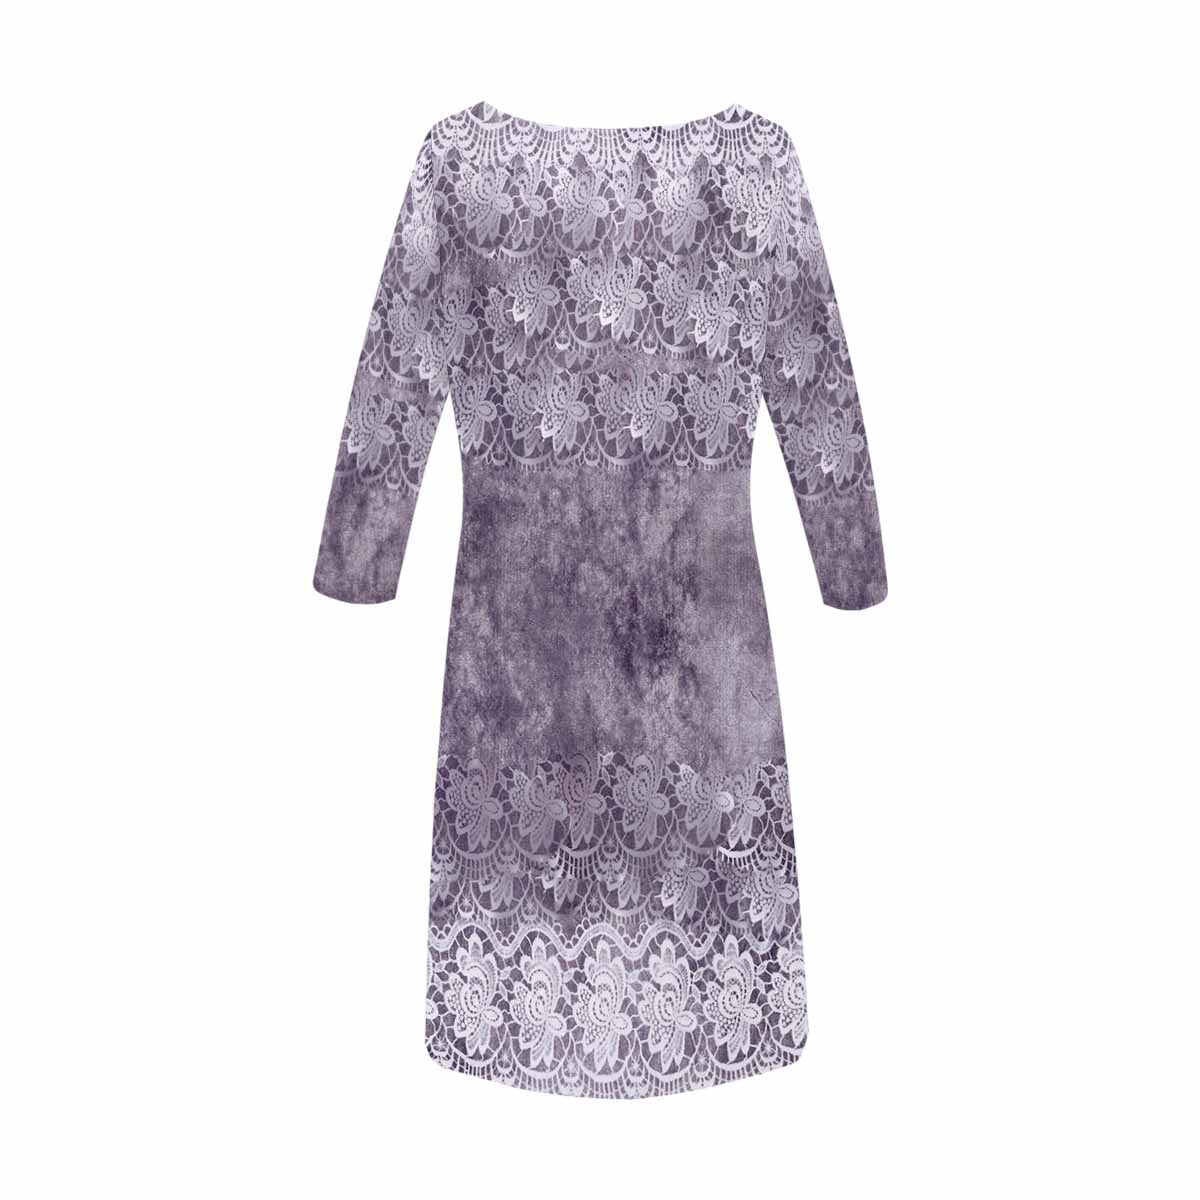 Victorian printed lace loose dress, Design 39